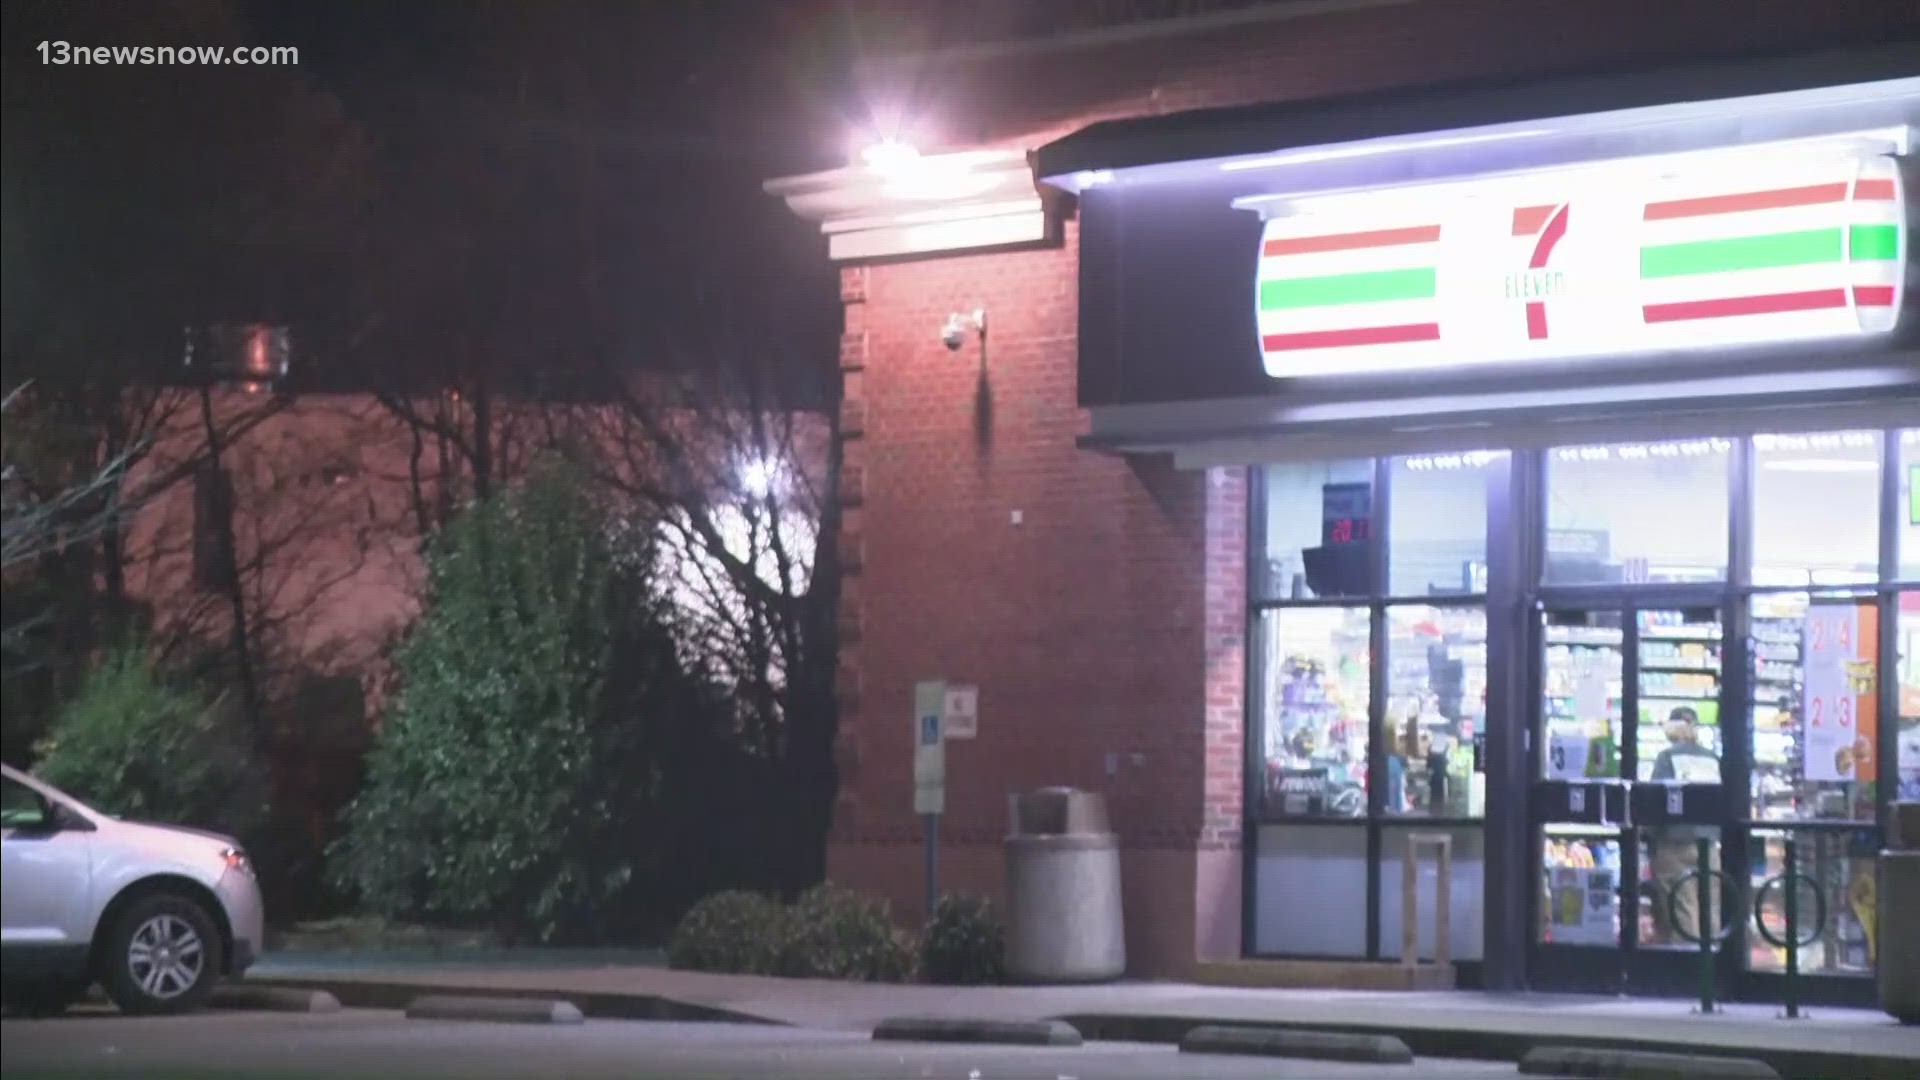 Virginia Beach police are searching for a shooting suspect they said injured a man at one of the city's 7-Eleven convenience store locations.